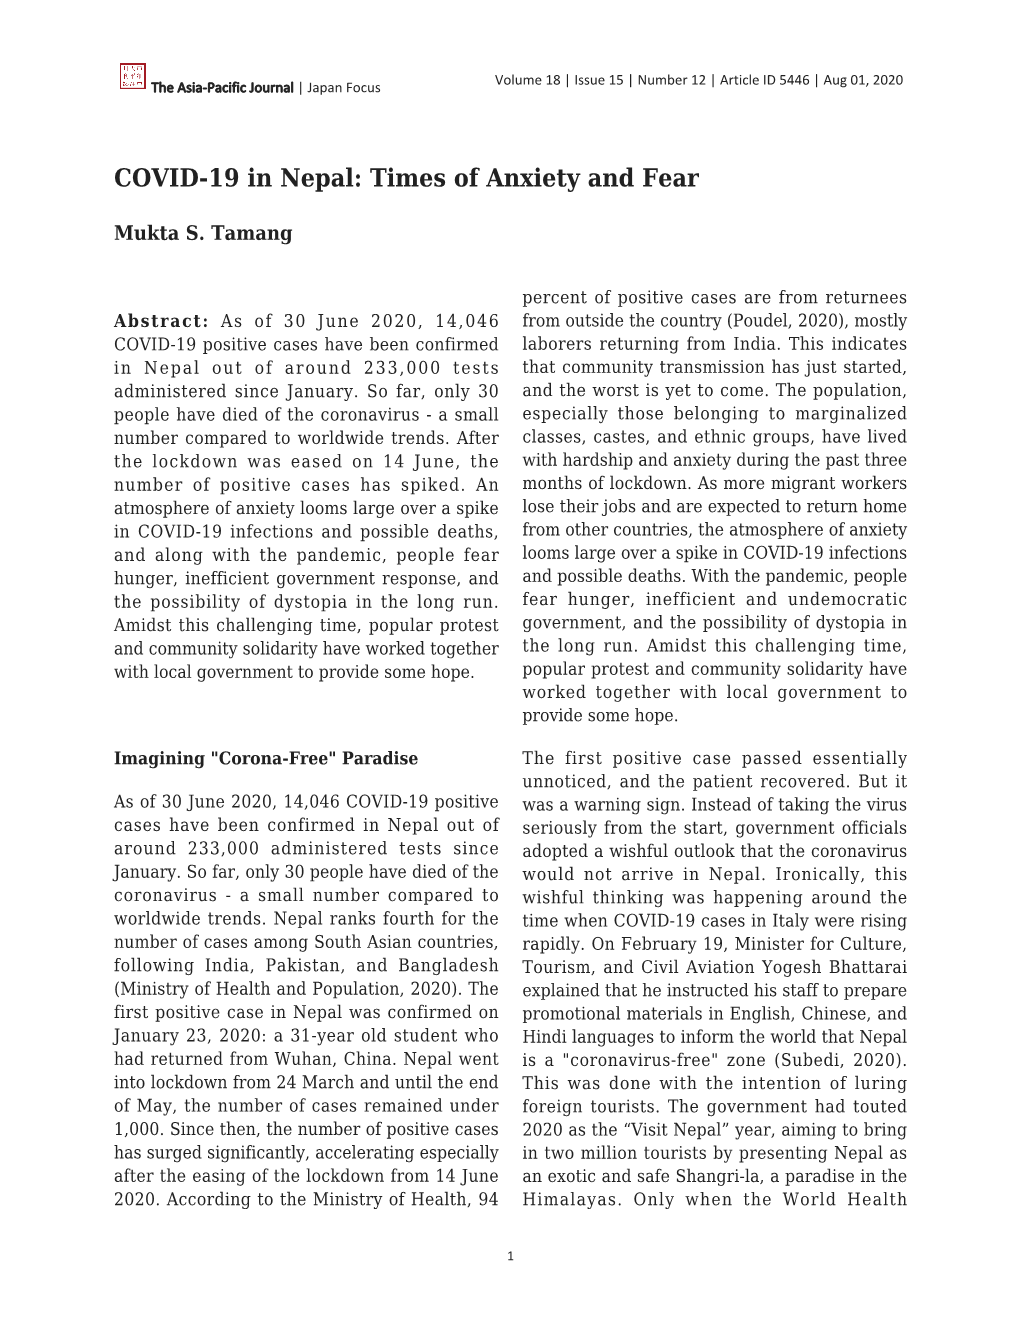 COVID-19 in Nepal: Times of Anxiety and Fear